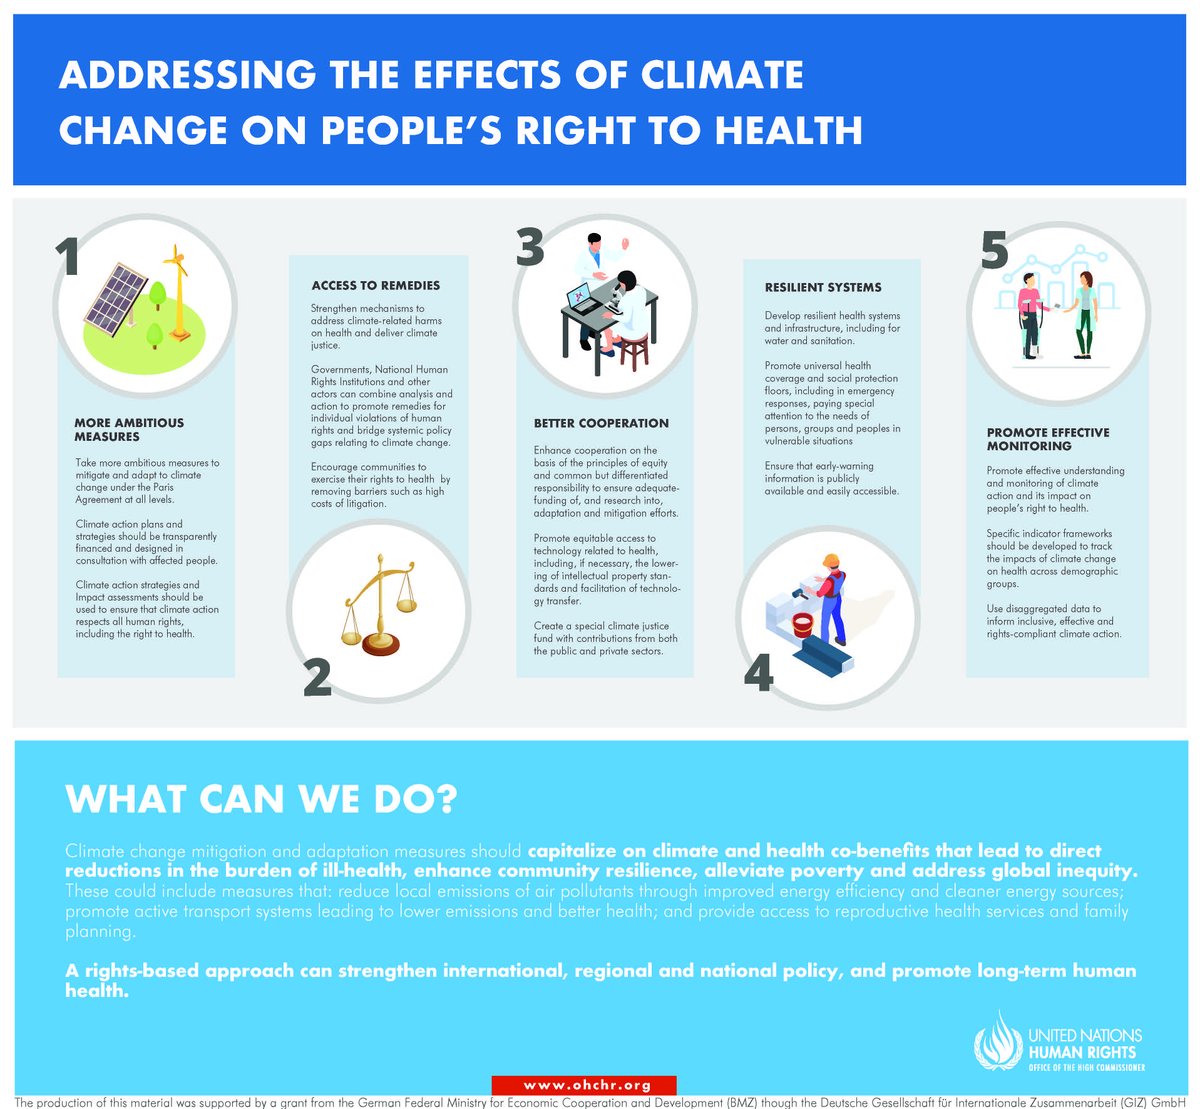 Climate change mitigation and adaptation measures should capitalize on climate and health co-benefits that lead to direct reductions in the burden of ill-health, enhance community resilience, alleviate poverty and address global inequity. #WorldHealthDay #HealthyEnvironment4All